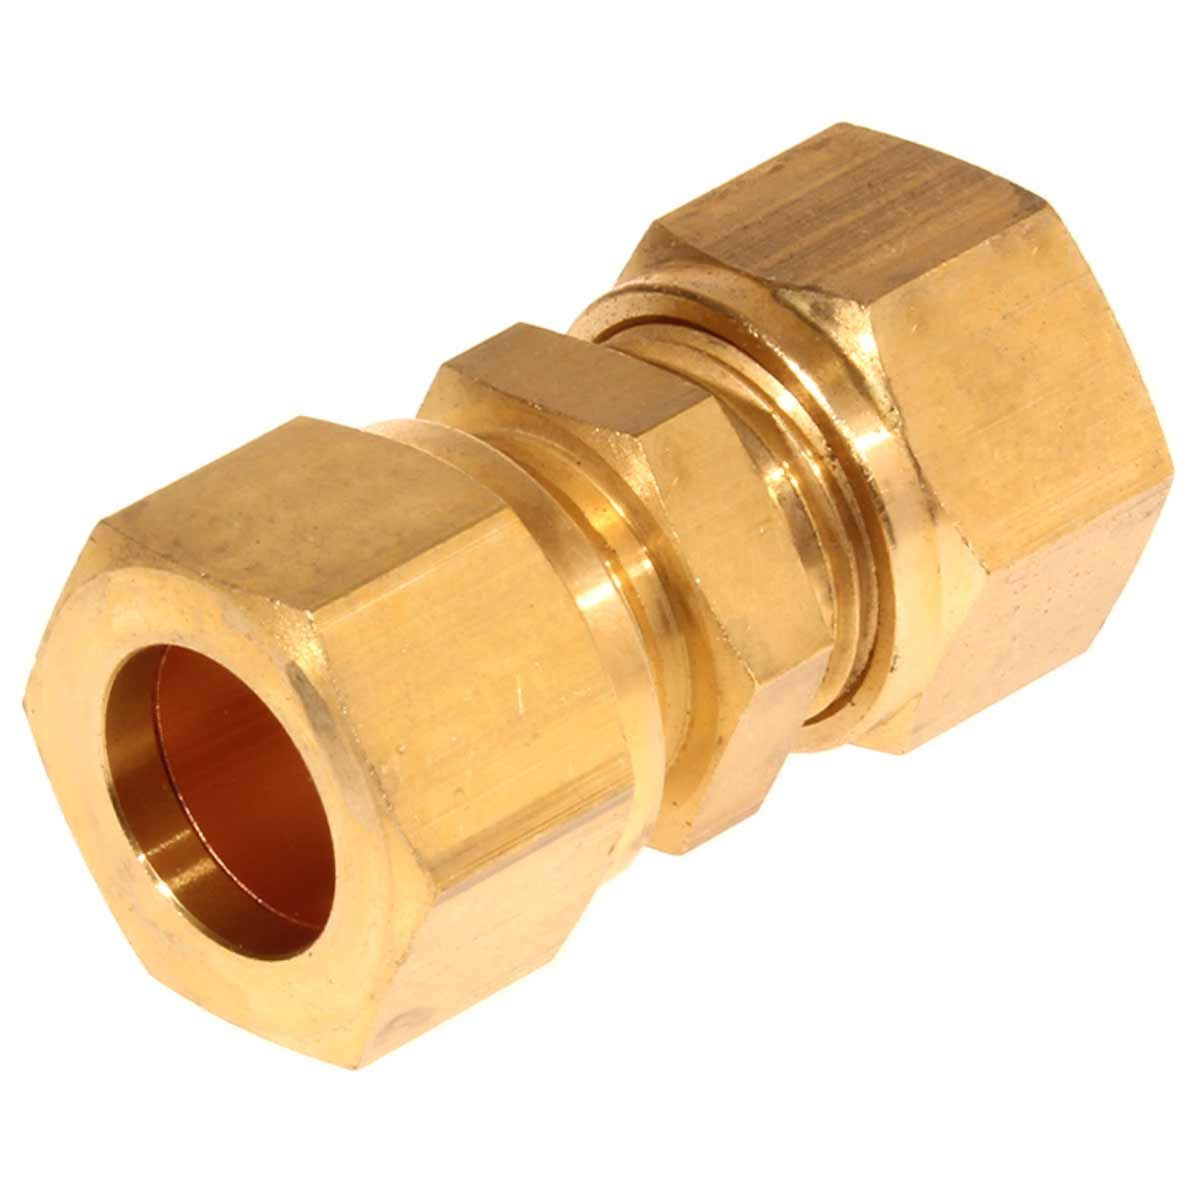 AG Brass Straight Coupling 15mm x 15mm